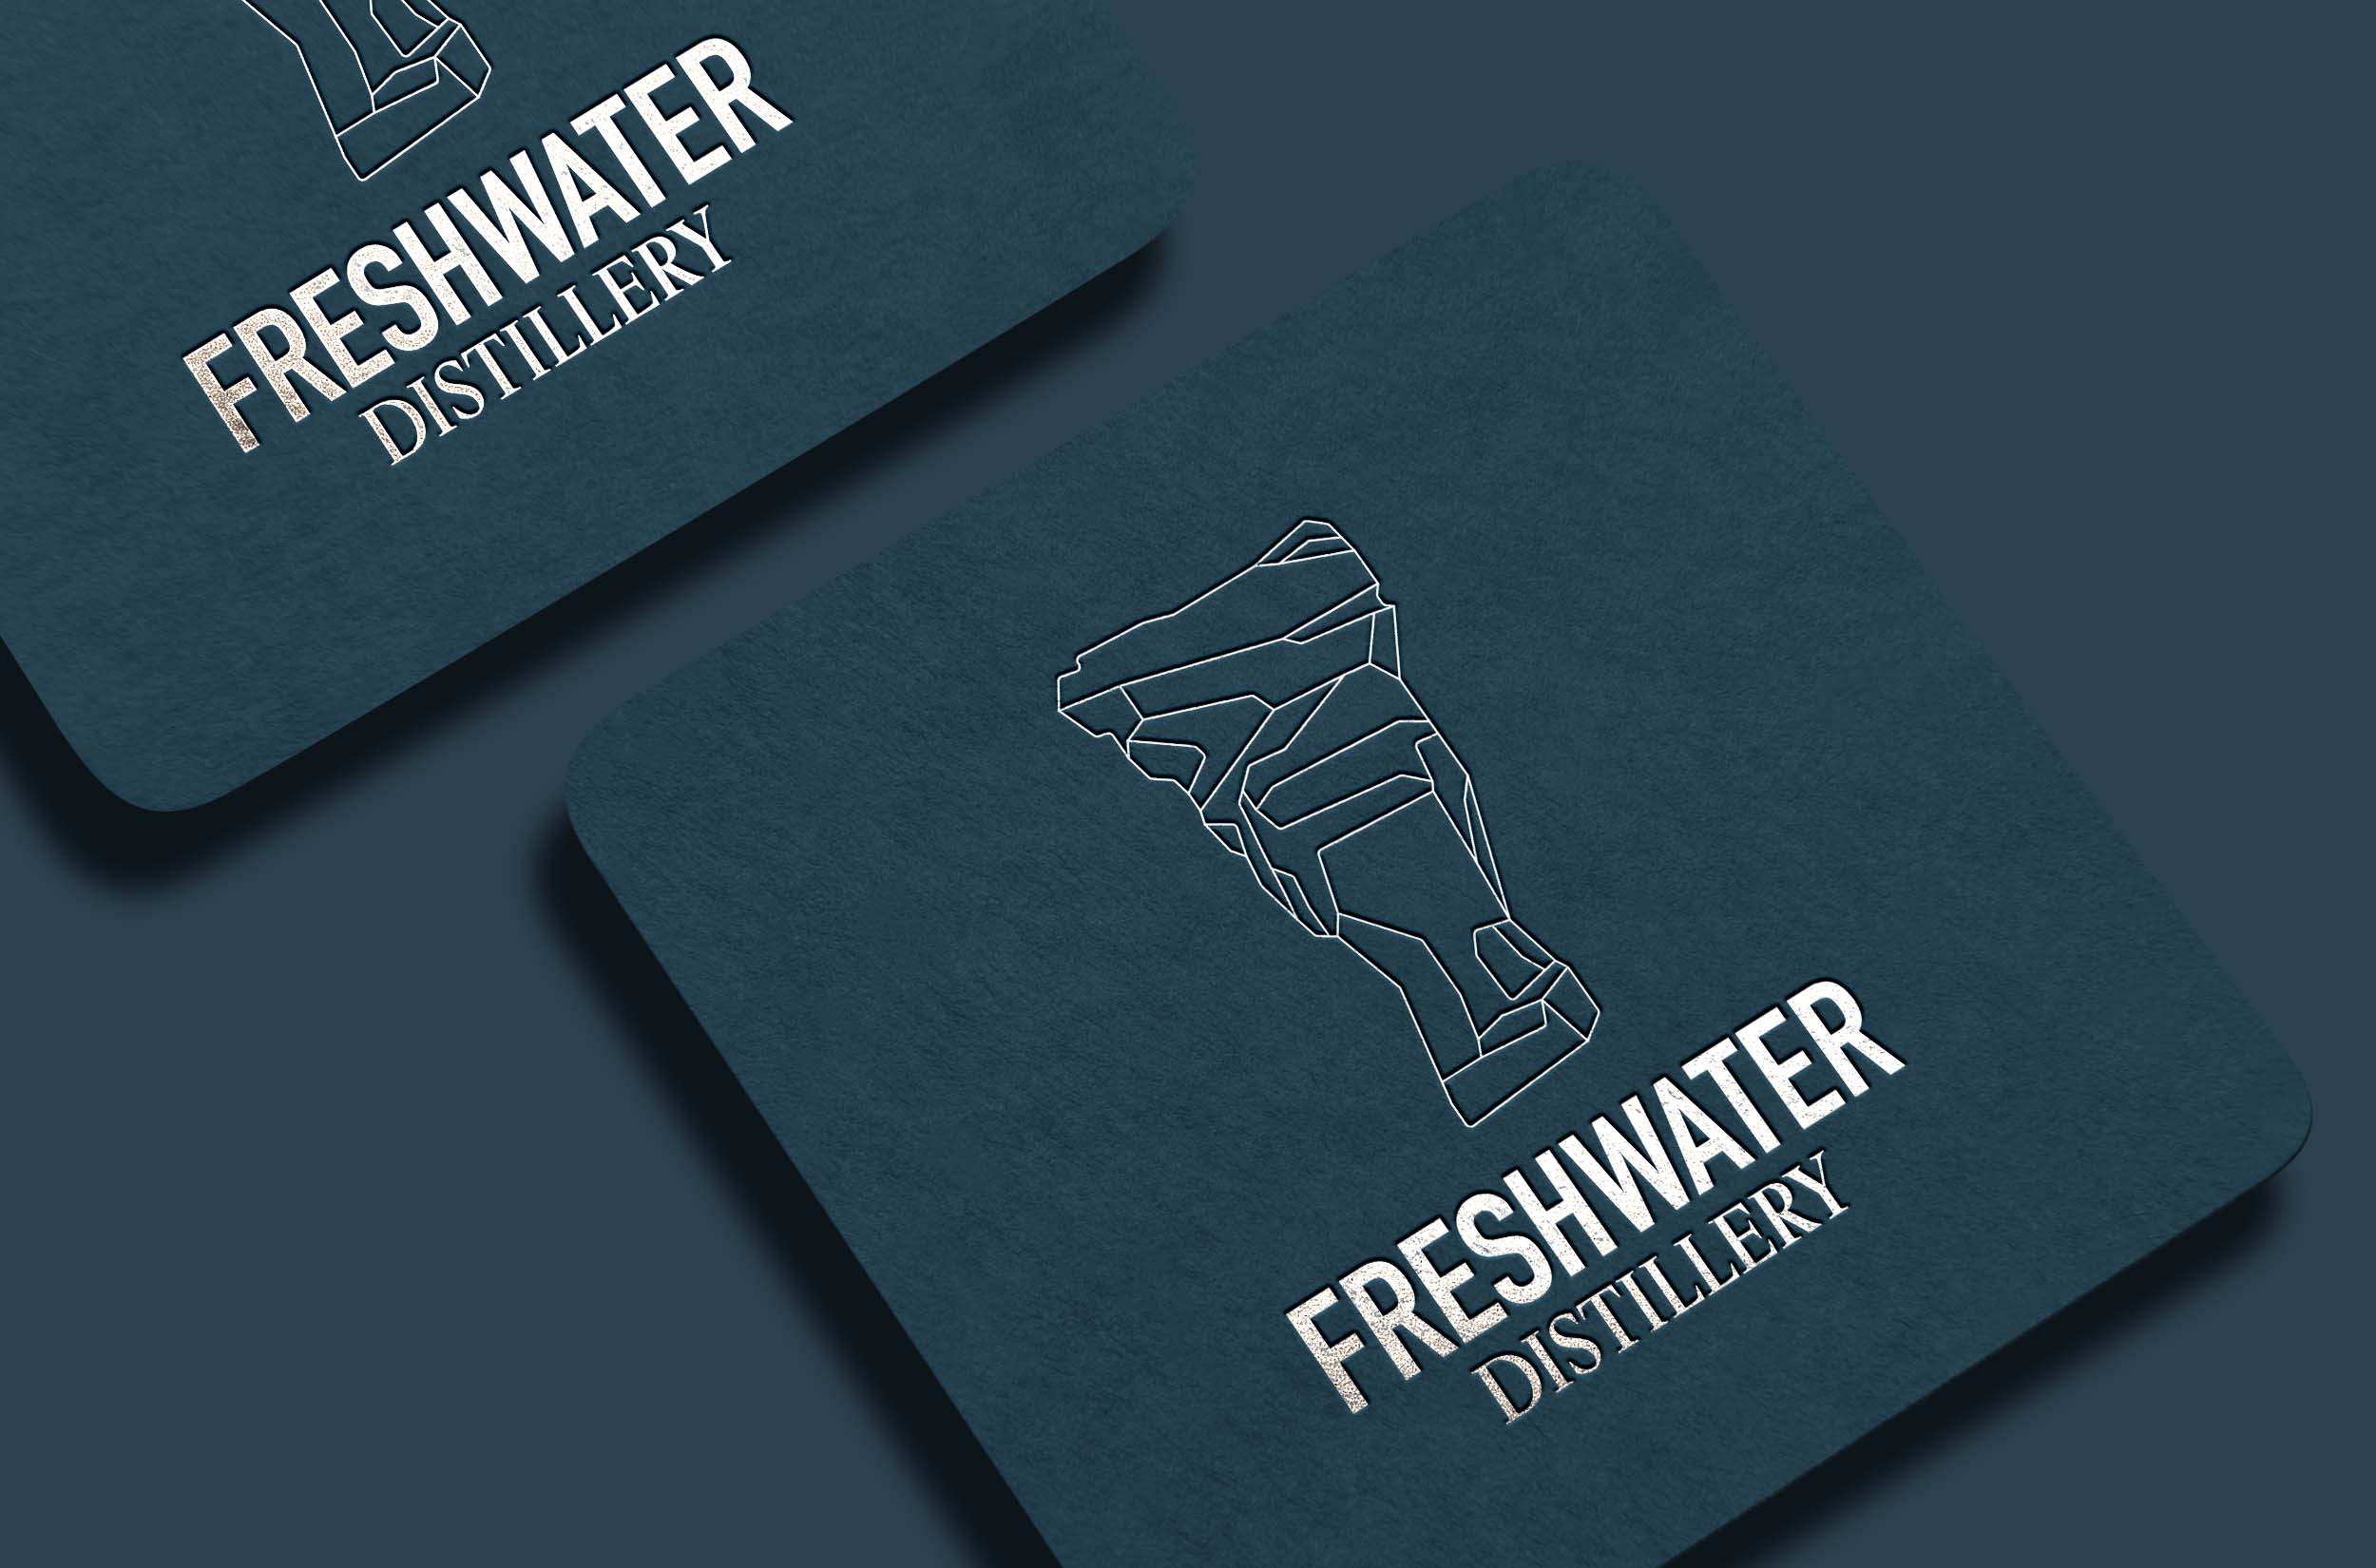 hyperposition-freshwater-distillery-product-coaster